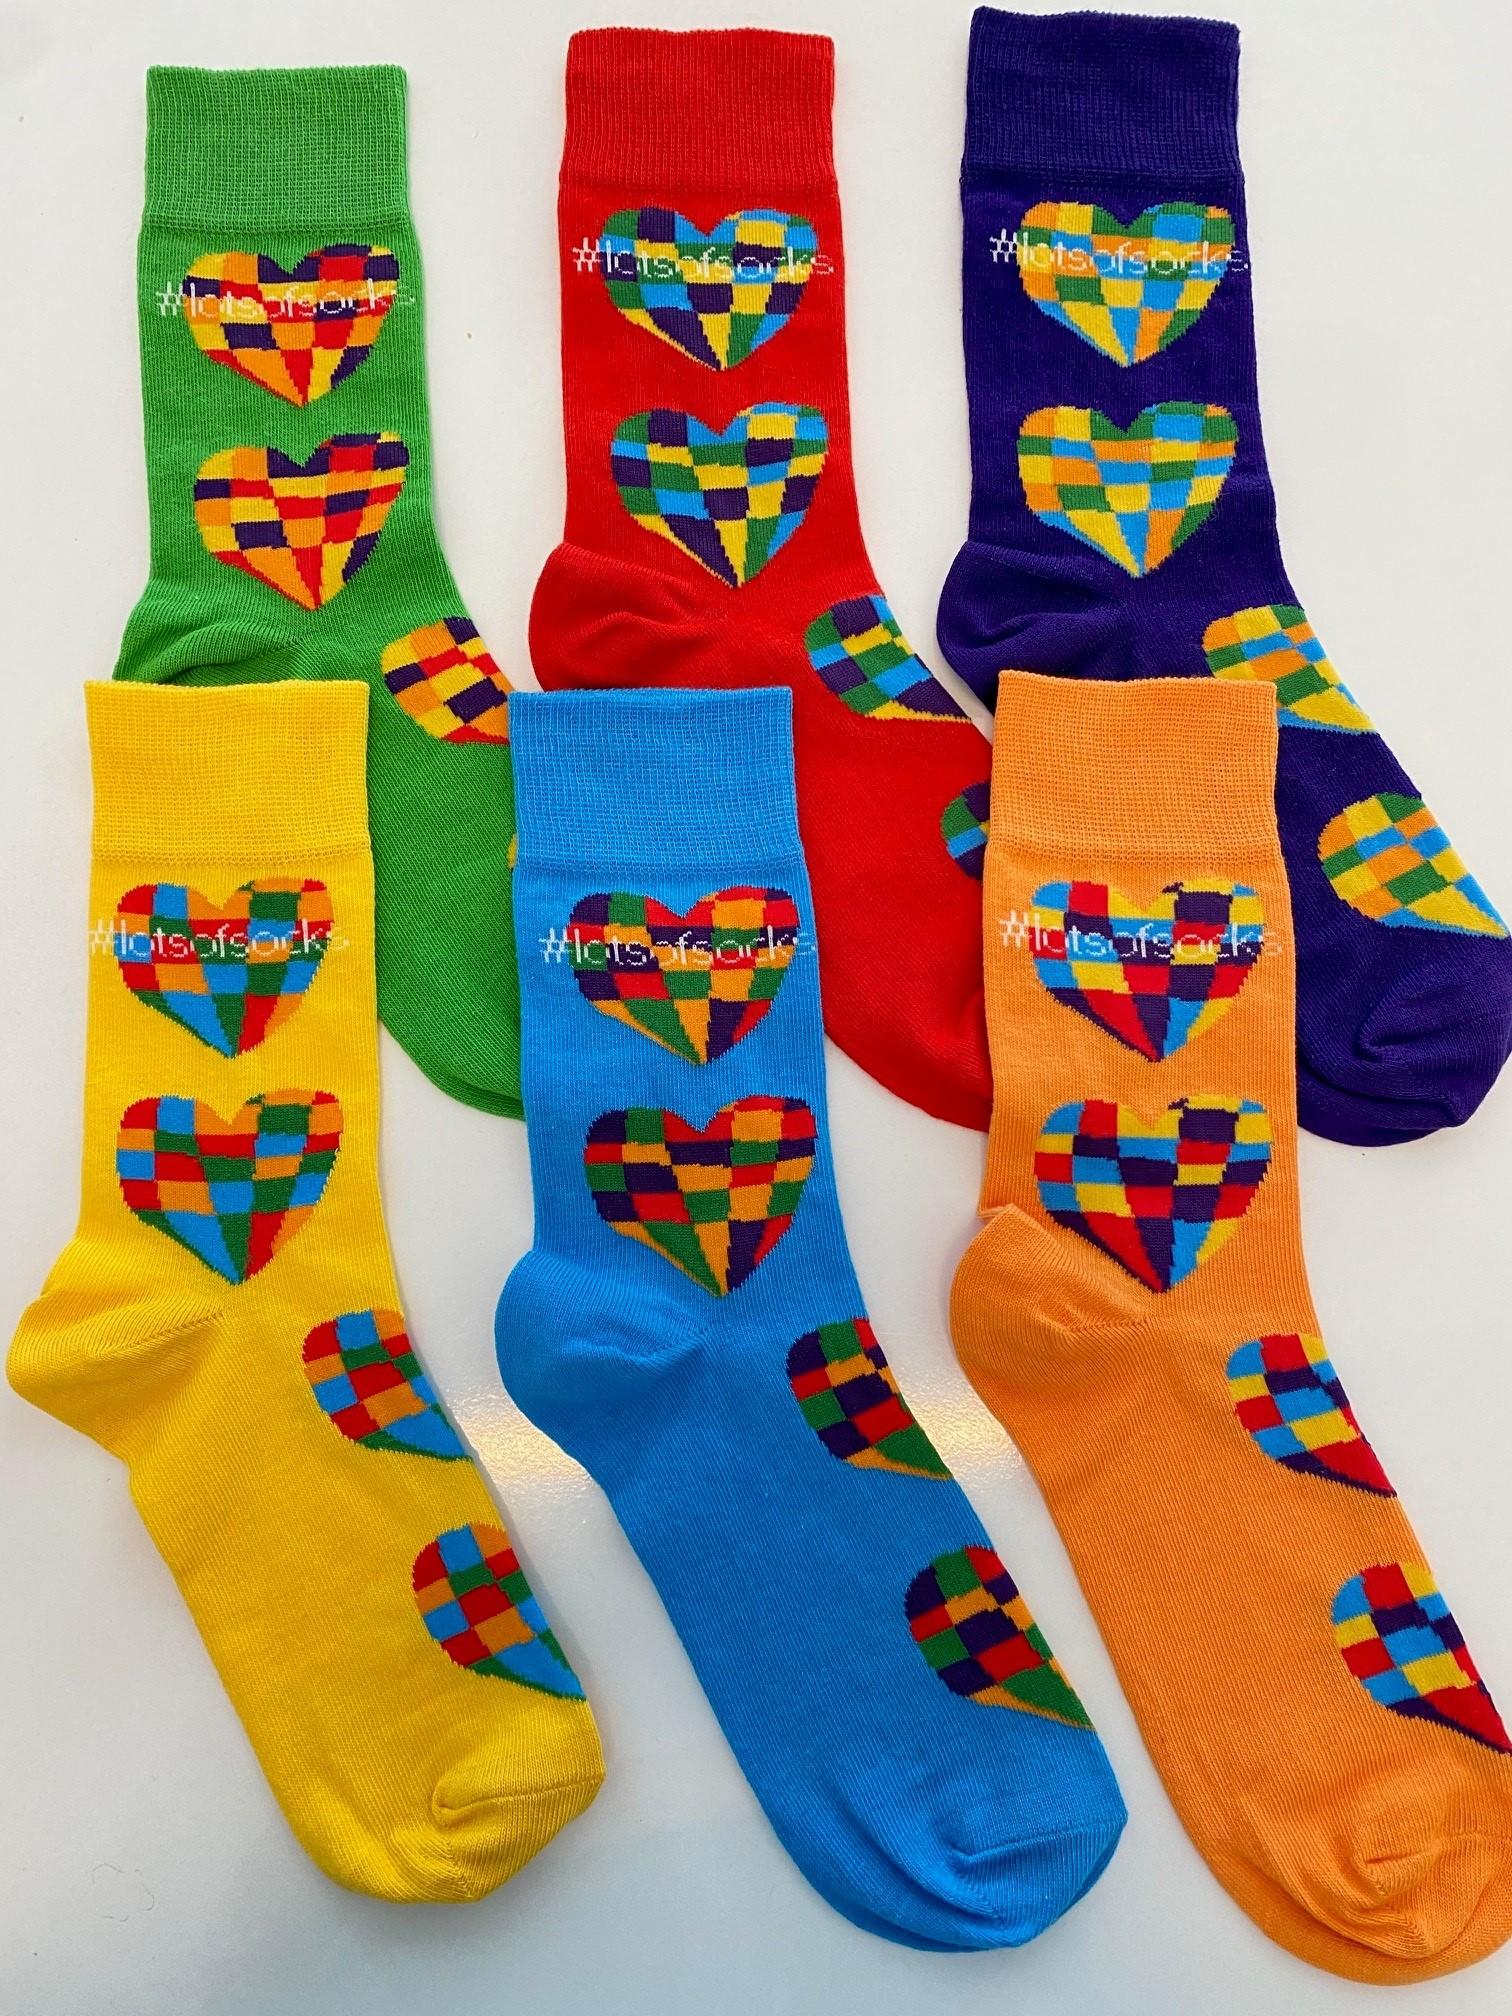 Six pairs of socks with heart designs on them and the words #lotsofsocks.